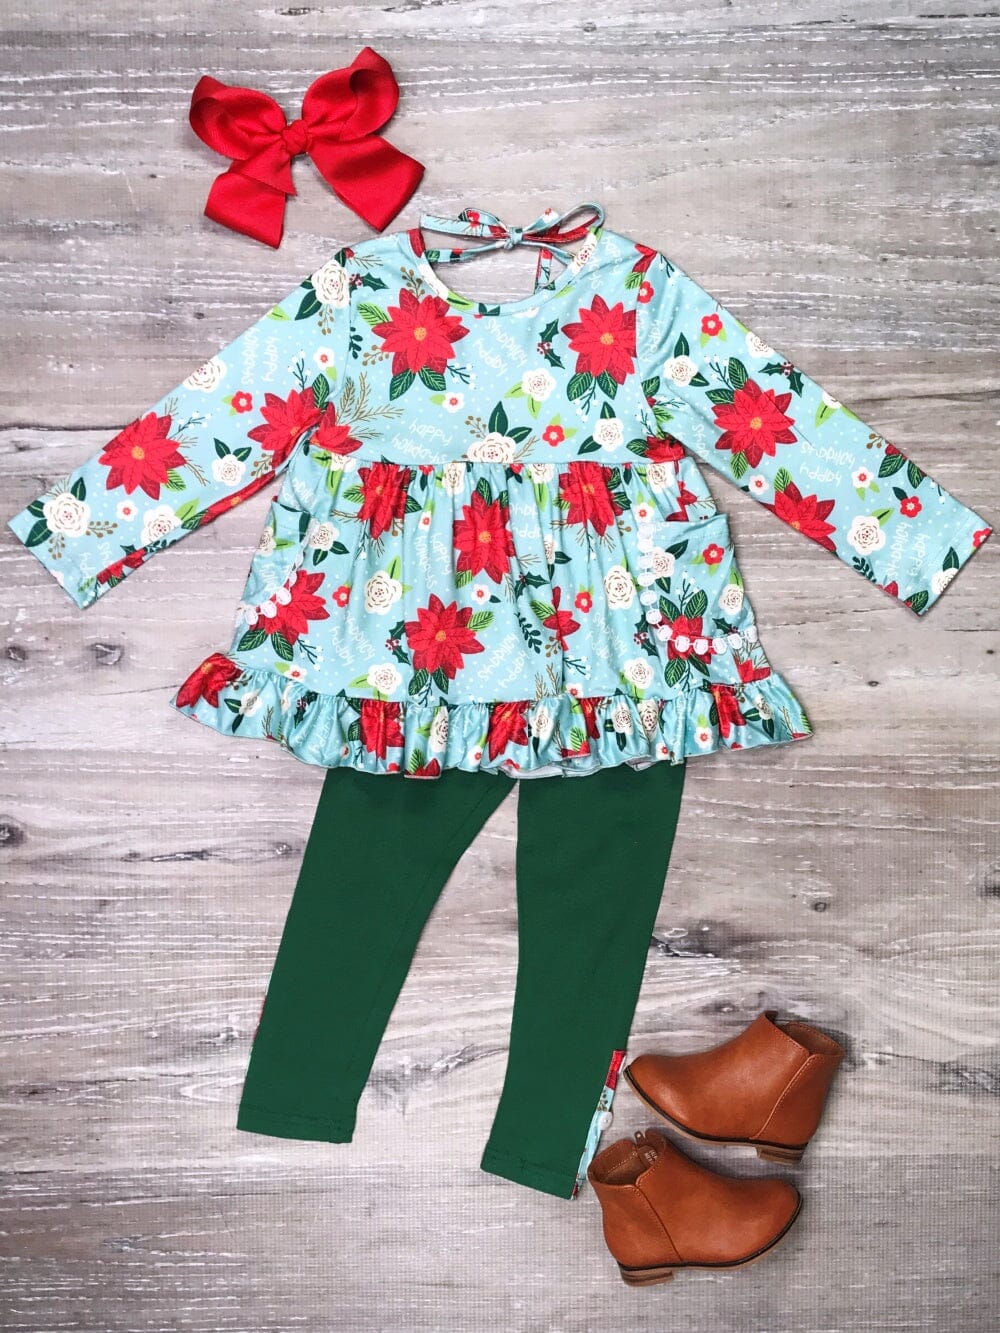 Pretty Poinsettia Blue & Green Floral Ruffle Girls Winter Outfit - Sydney So Sweet